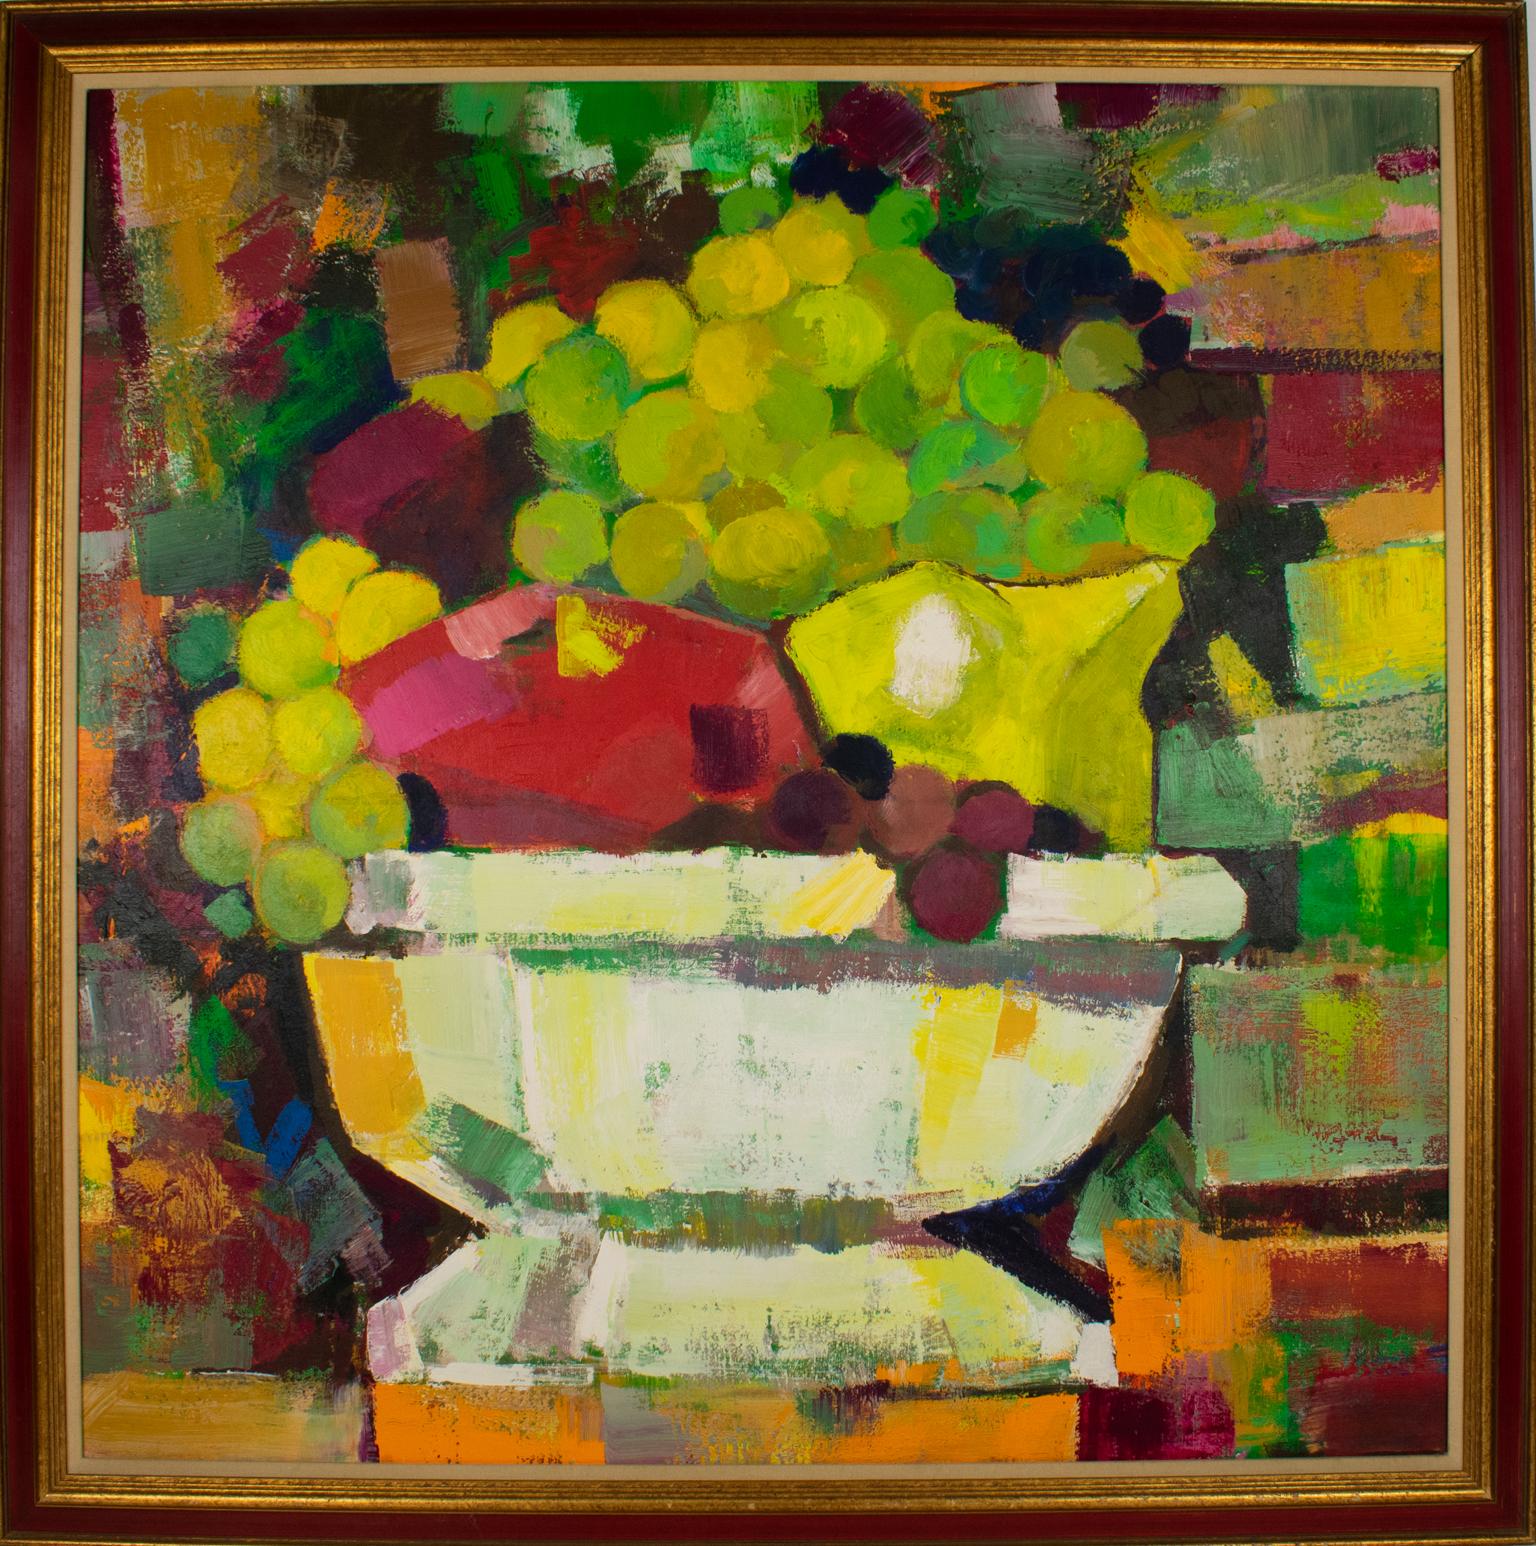 Colorful Still Life of Bowl with Fruits Oil on Canvas Painting